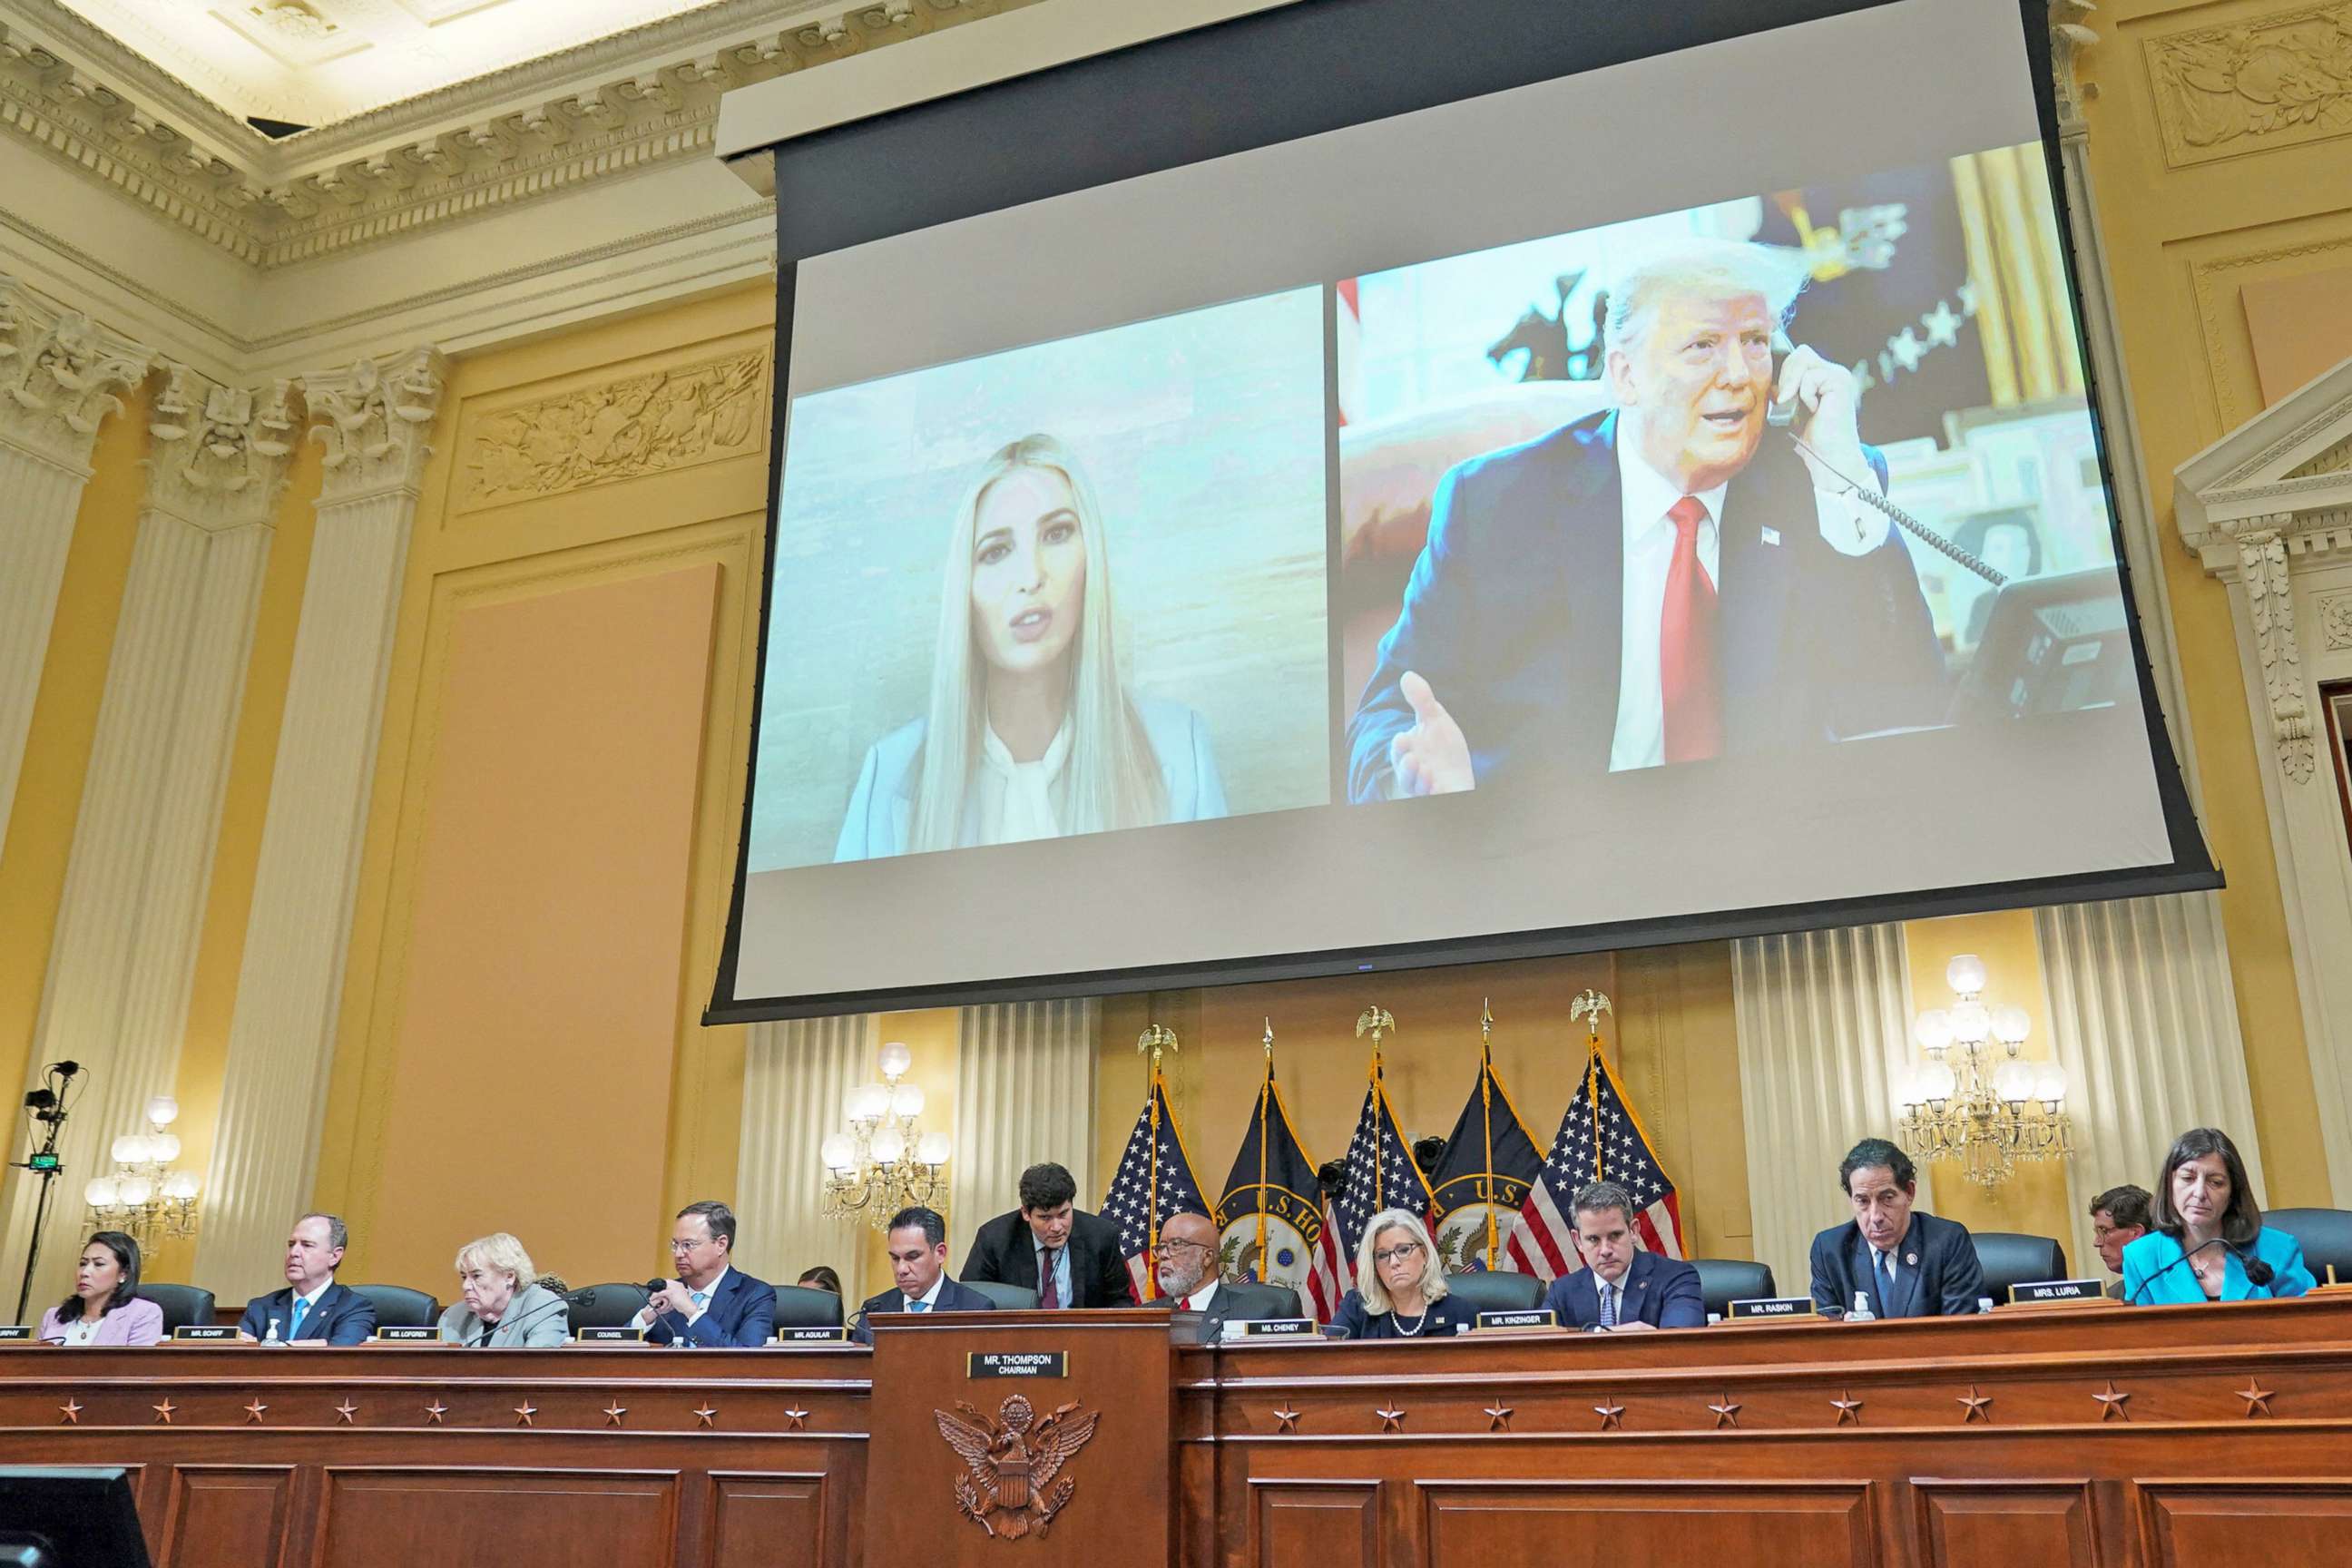 PHOTO: Ivanka Trump testifies about a phone call between President Trump and VP Pence, made during an Oval Office meeting on Jan. 6, 2021, in video shown at the hearing investigating the Jan. 6 Attack on the US Capitol, in Washington, D.C., June 16, 2022.